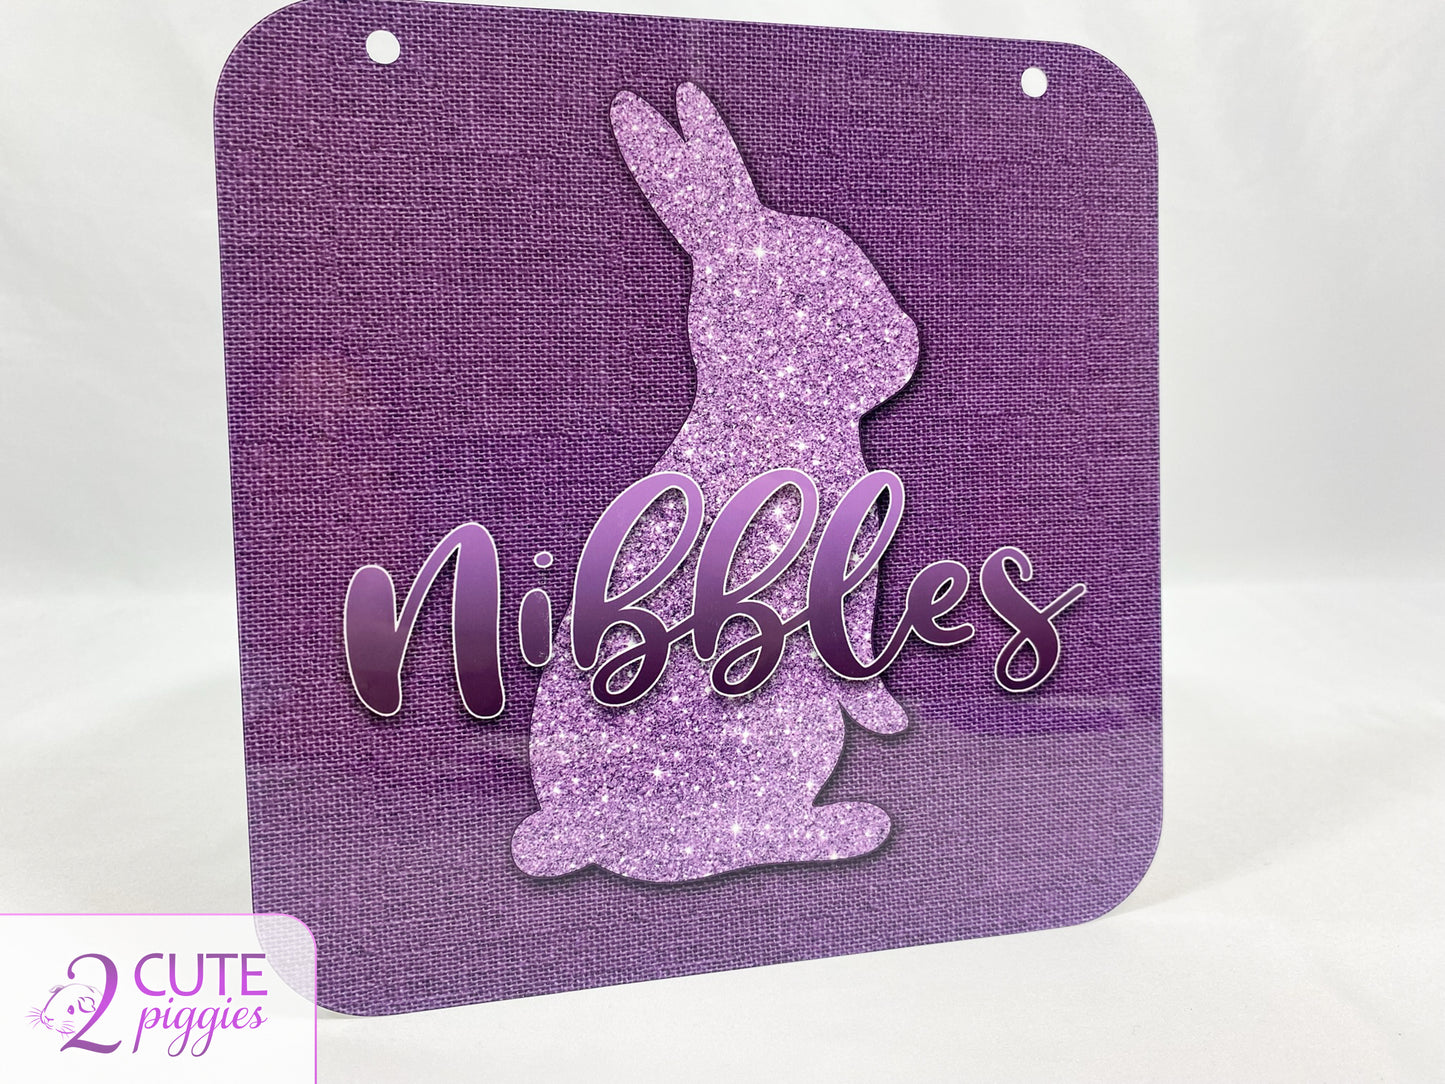 Rabbit Name Tag - Upright Ears Rabbit Silhouette - 8"x8"